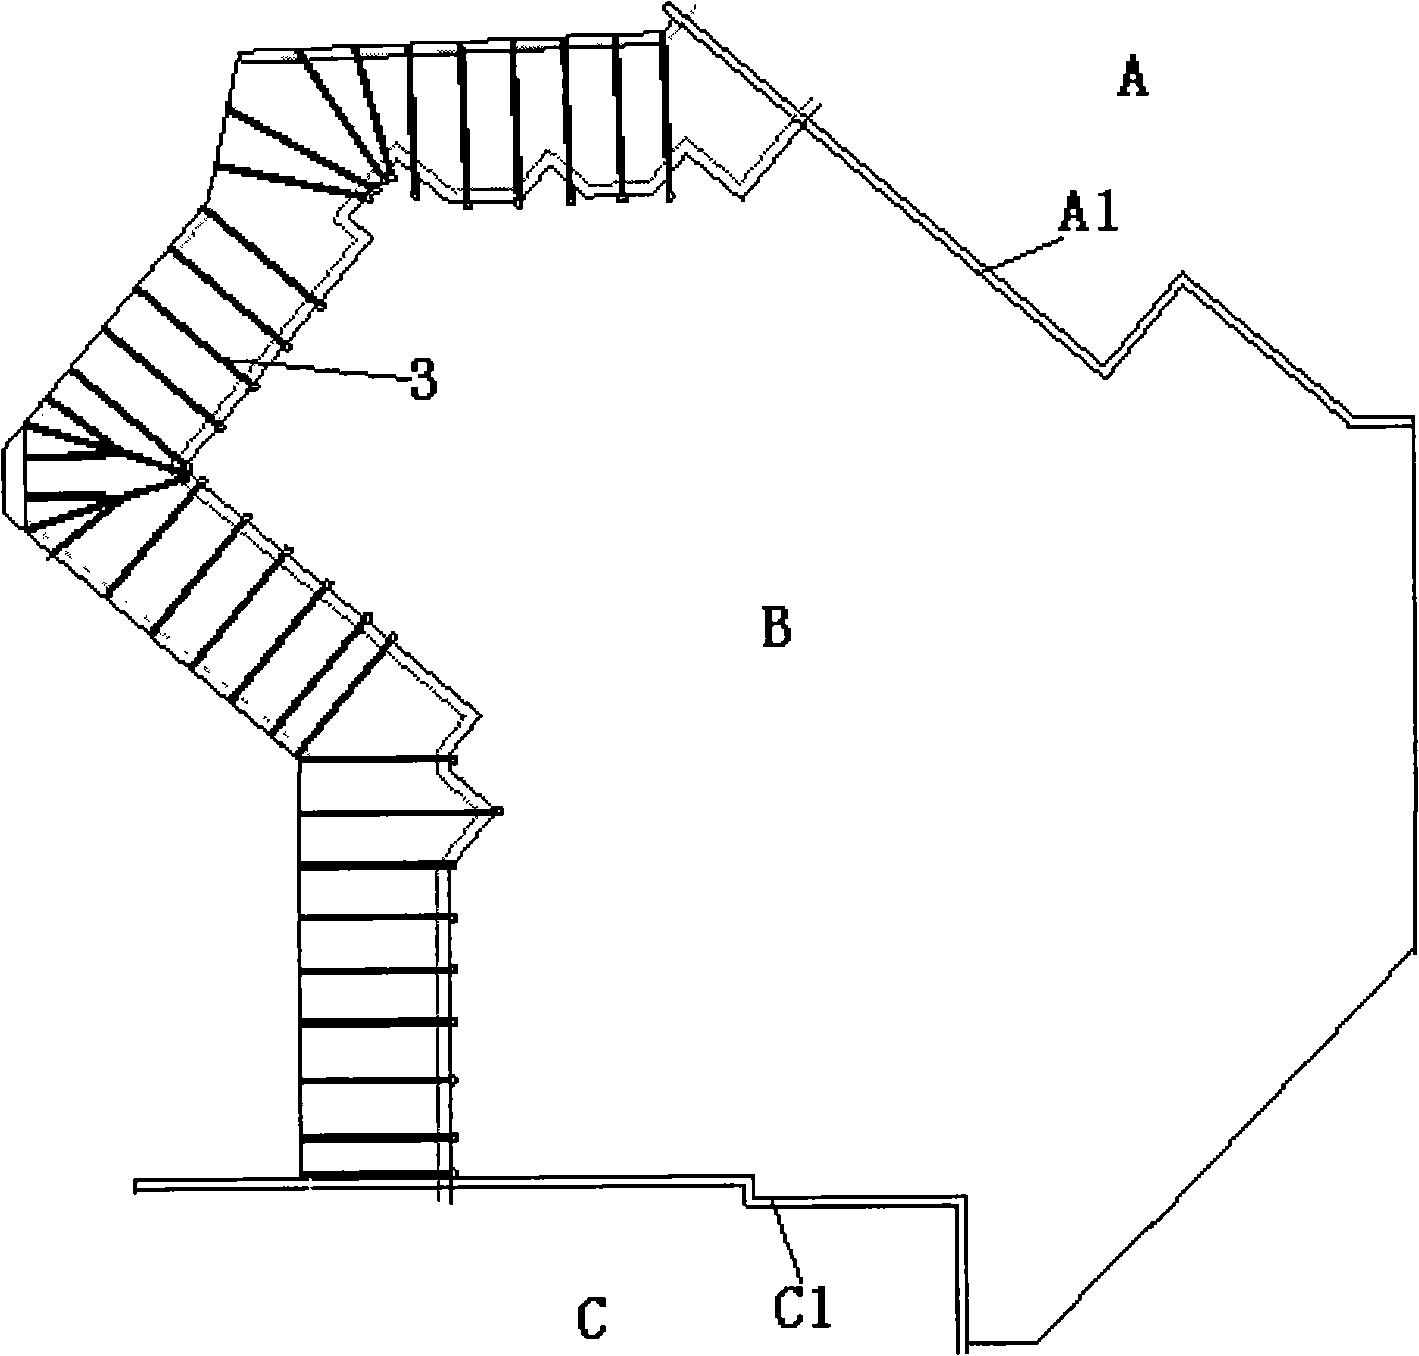 Support system and construction method for smoothening-digging partial center island foundation pit